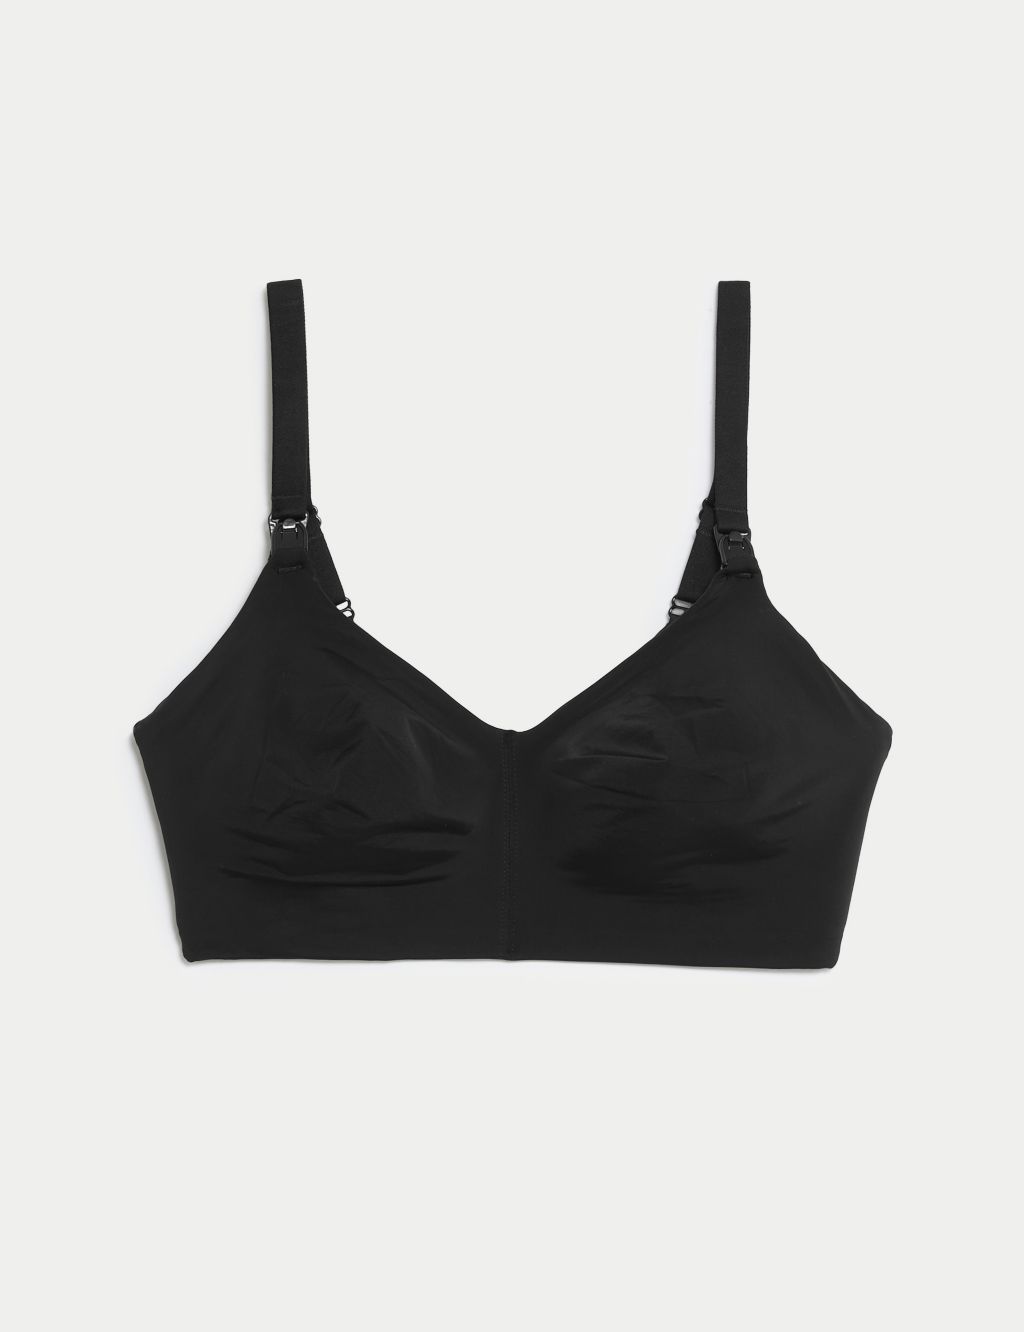 RelaxMaternity 5310 (Black, S) Cotton Non-Wired Push-up Maternity Bra with  Wide Straps, 100% Made in Italy at  Women's Clothing store